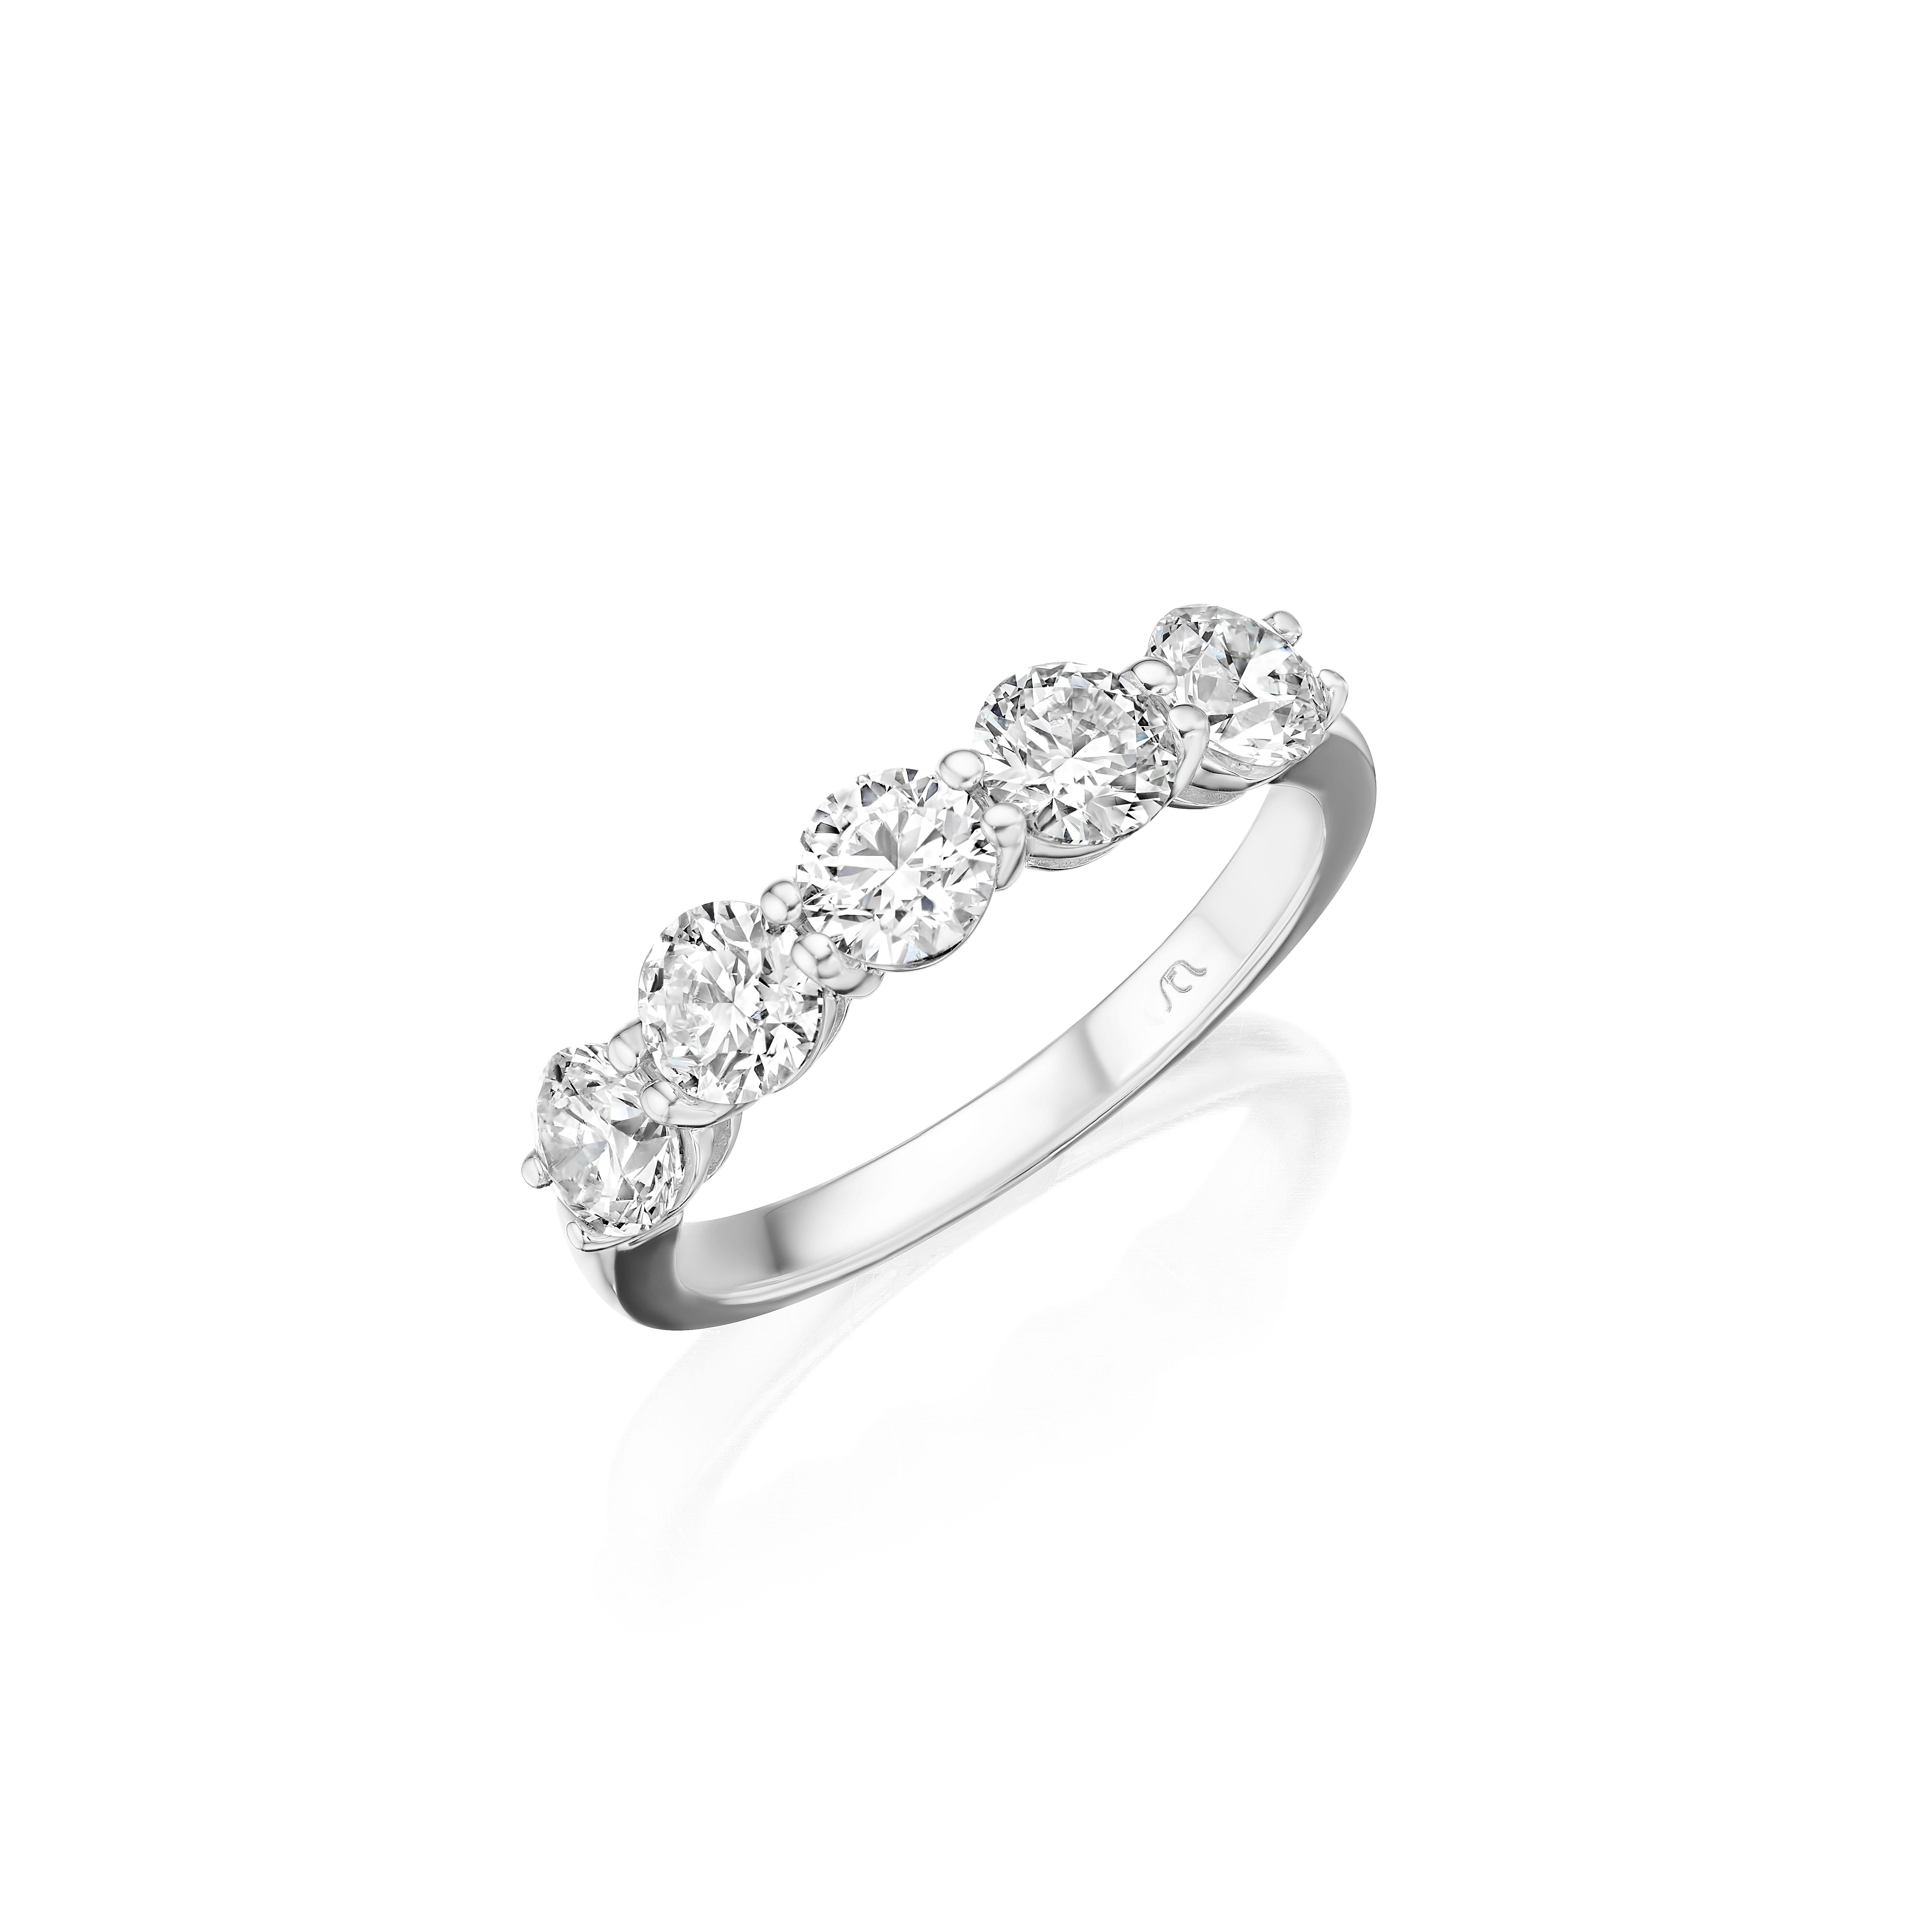 • Crafted in 18KT gold, this band is made with 5 round diamonds, and has a combining total weight of approximately 1.50 carats. The diamonds are set into a shared prong setting. Worn beautifully on its own or stacked. A beautiful and versatile piece